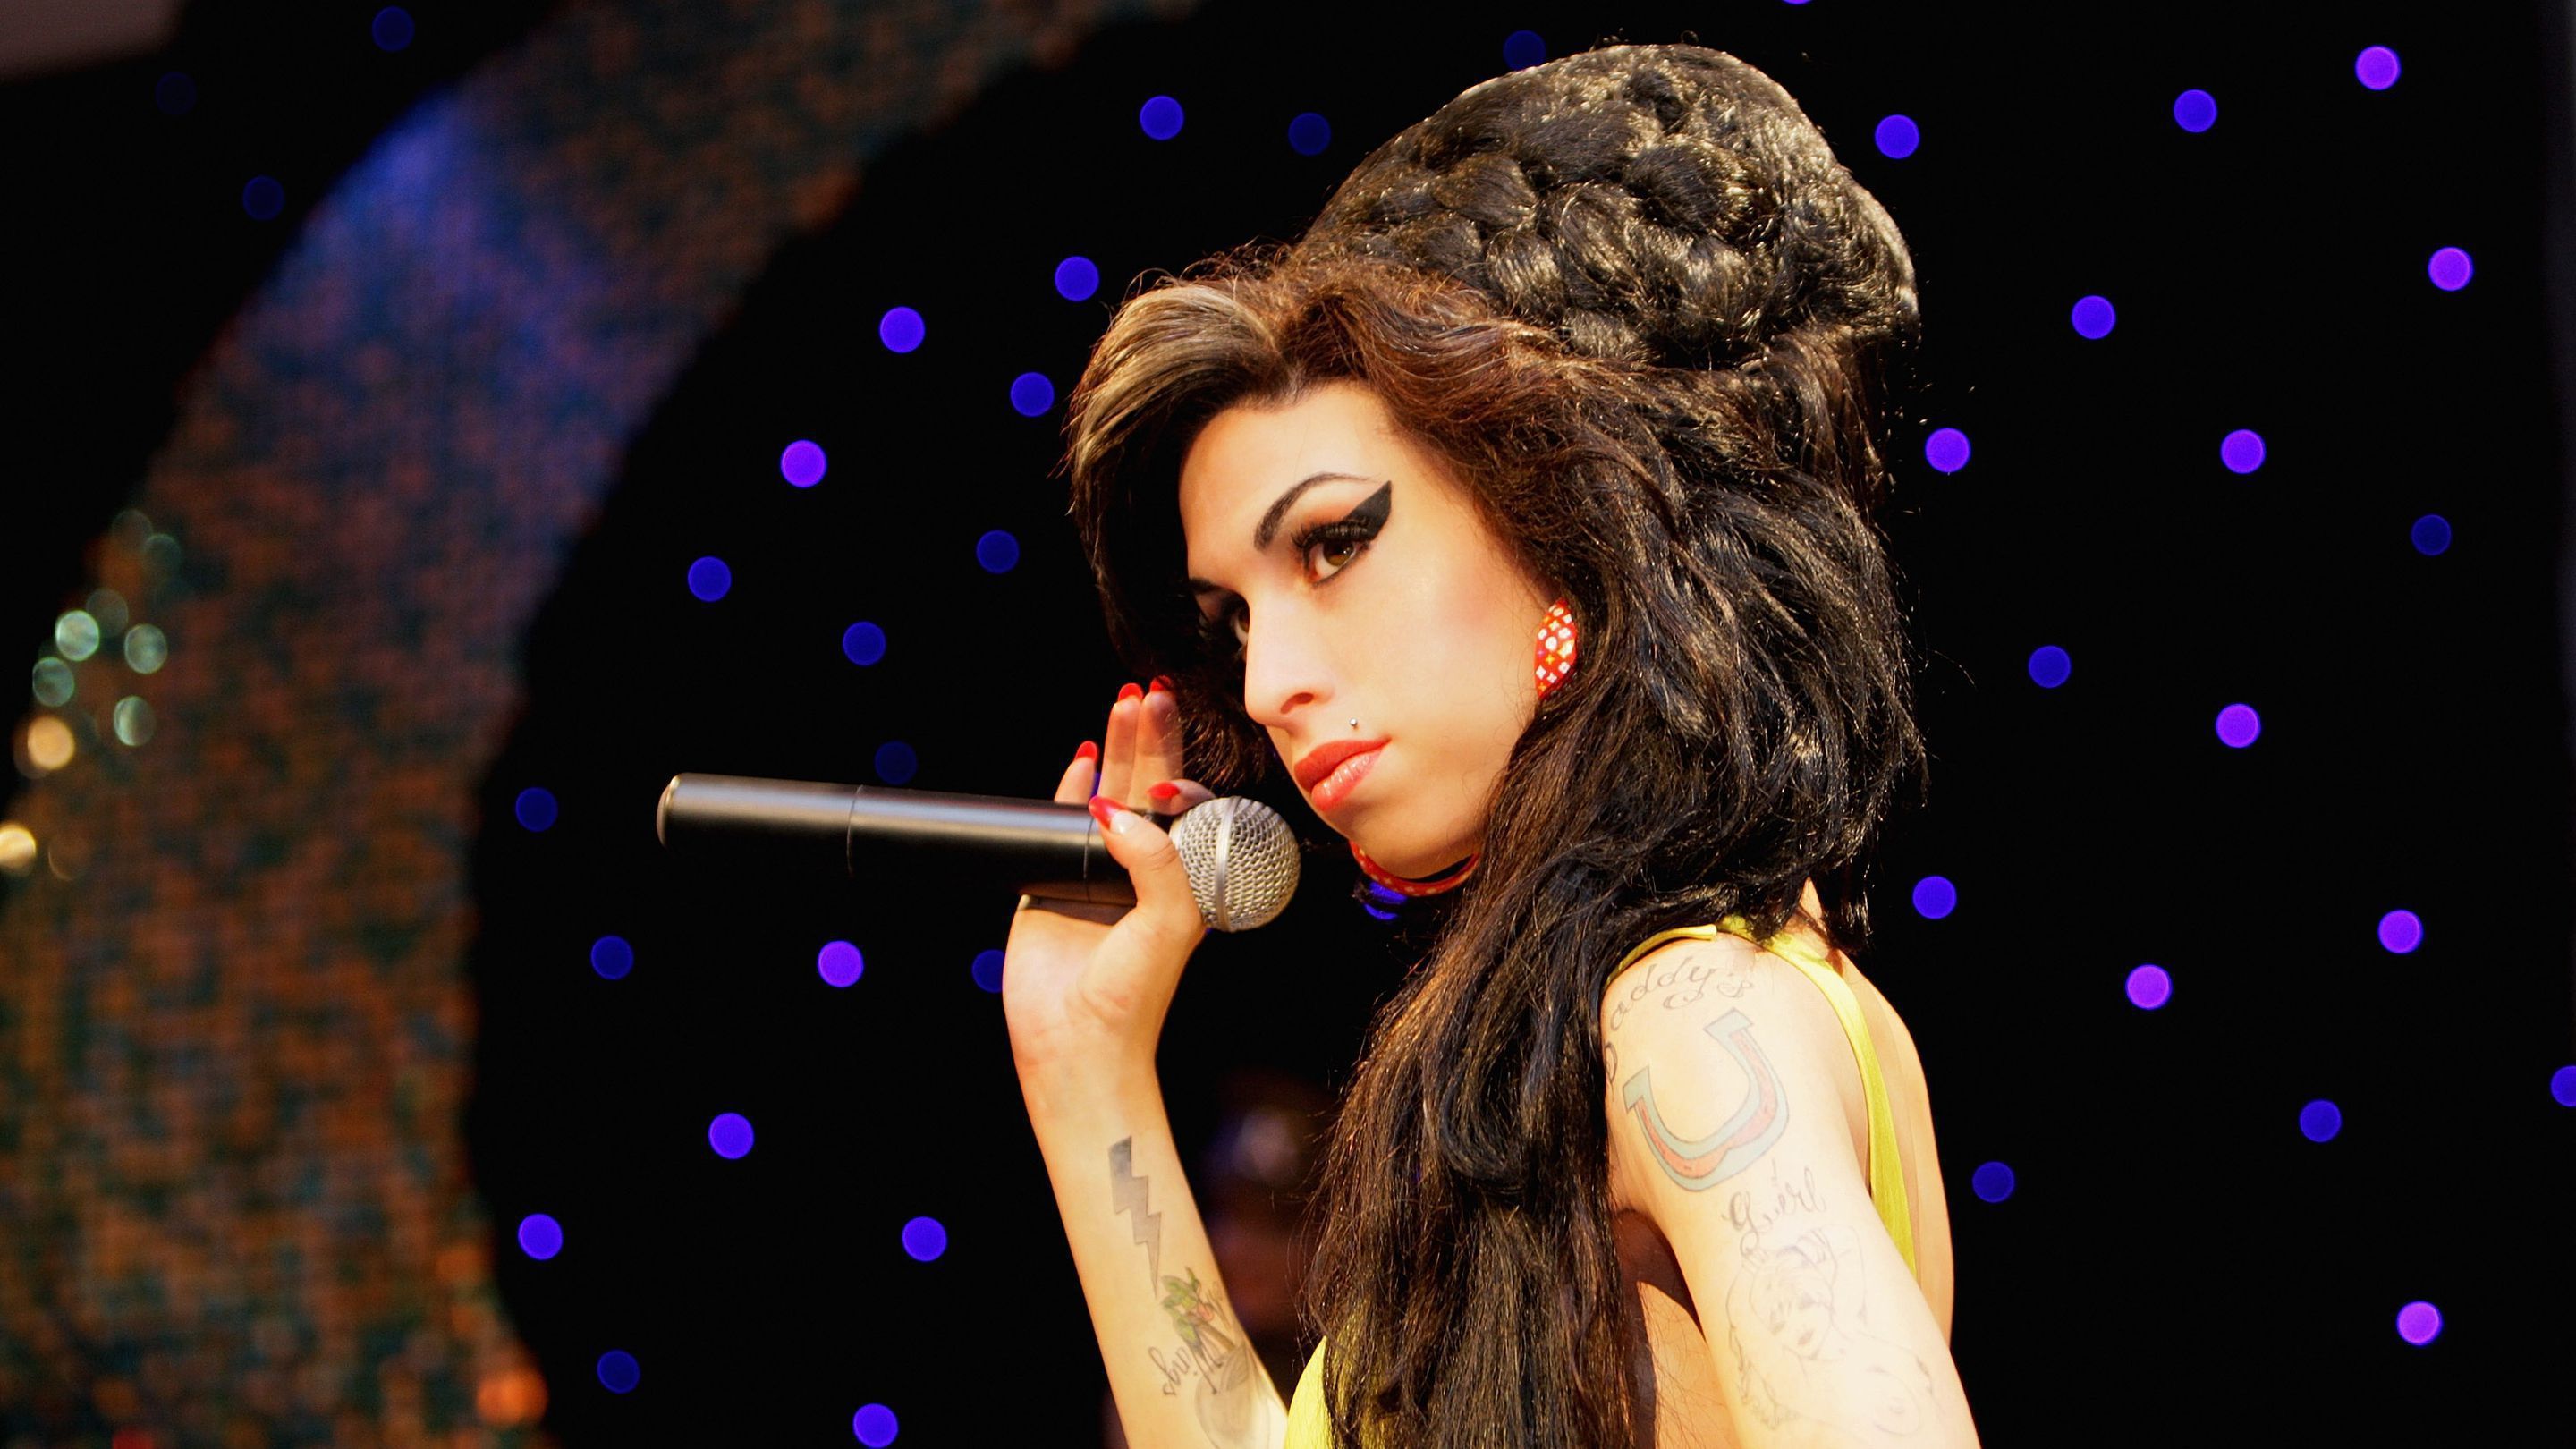 Amy Winehouse phone, desktop wallpaper, picture, photo, bckground image